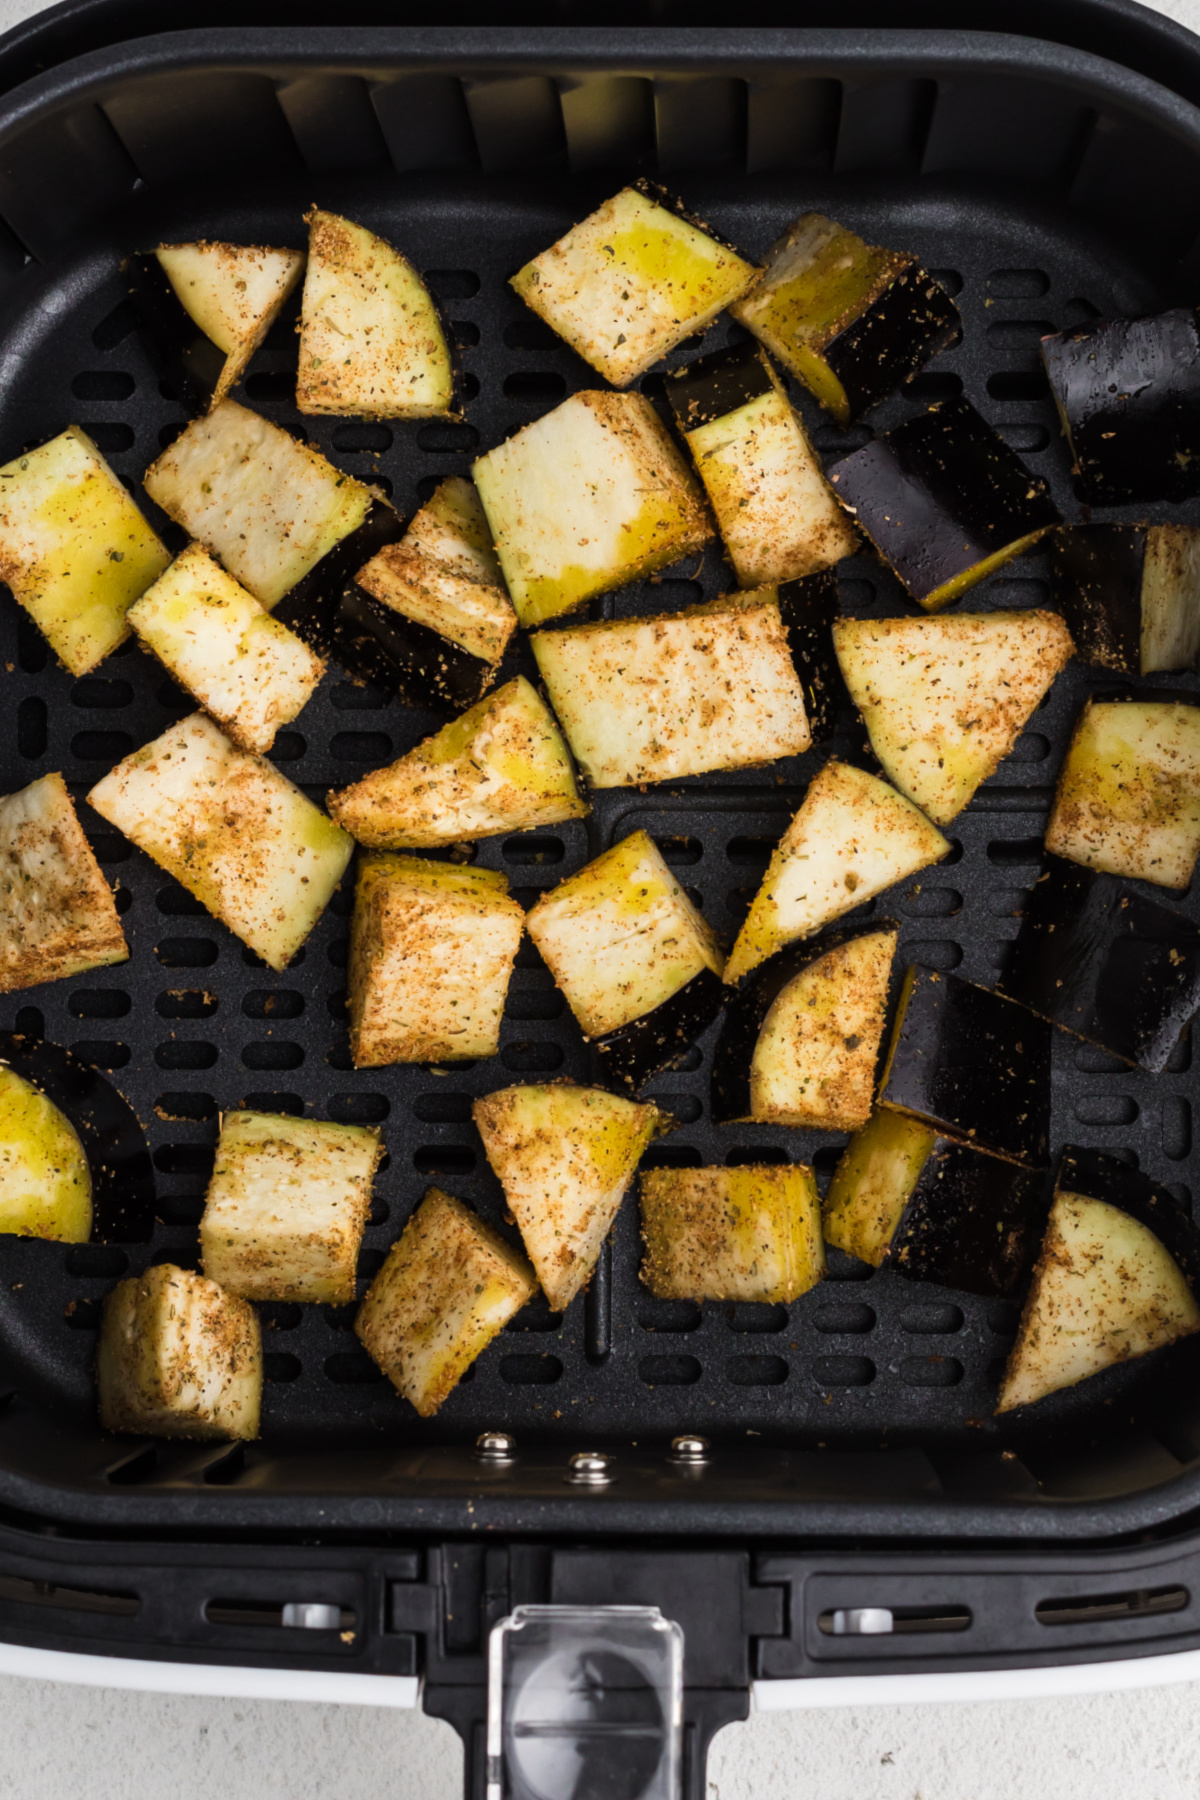 Seasoned eggplant wedges in a single layer in the prepared basket of the air fryer.